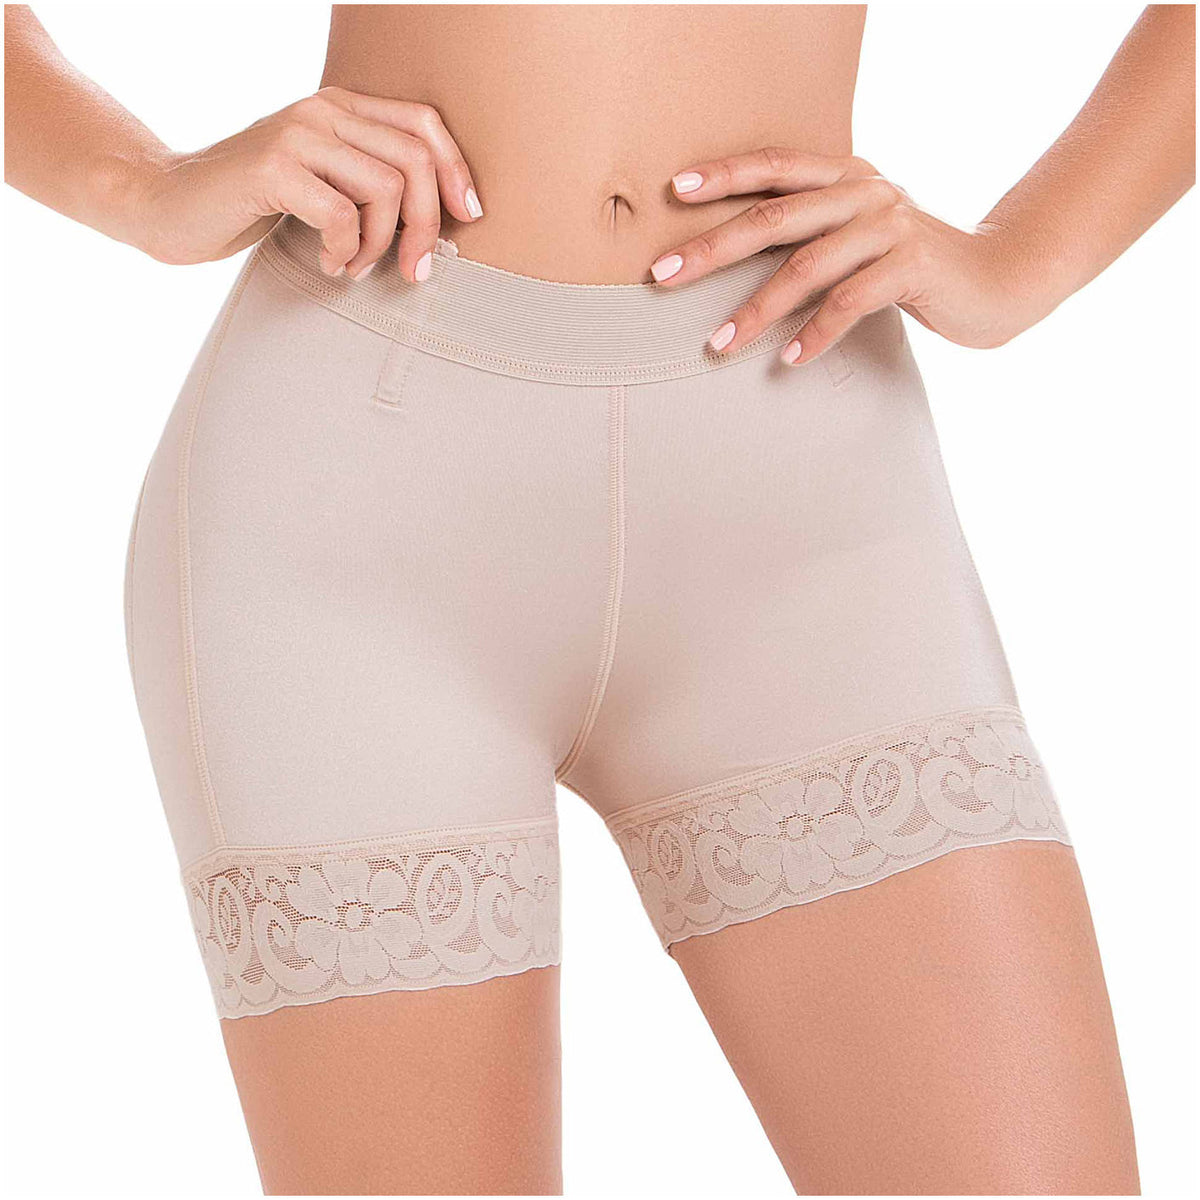 Fajas MariaE FU100 Colombian Butt Lifting Shapewear For Women Shorts For Daily Use